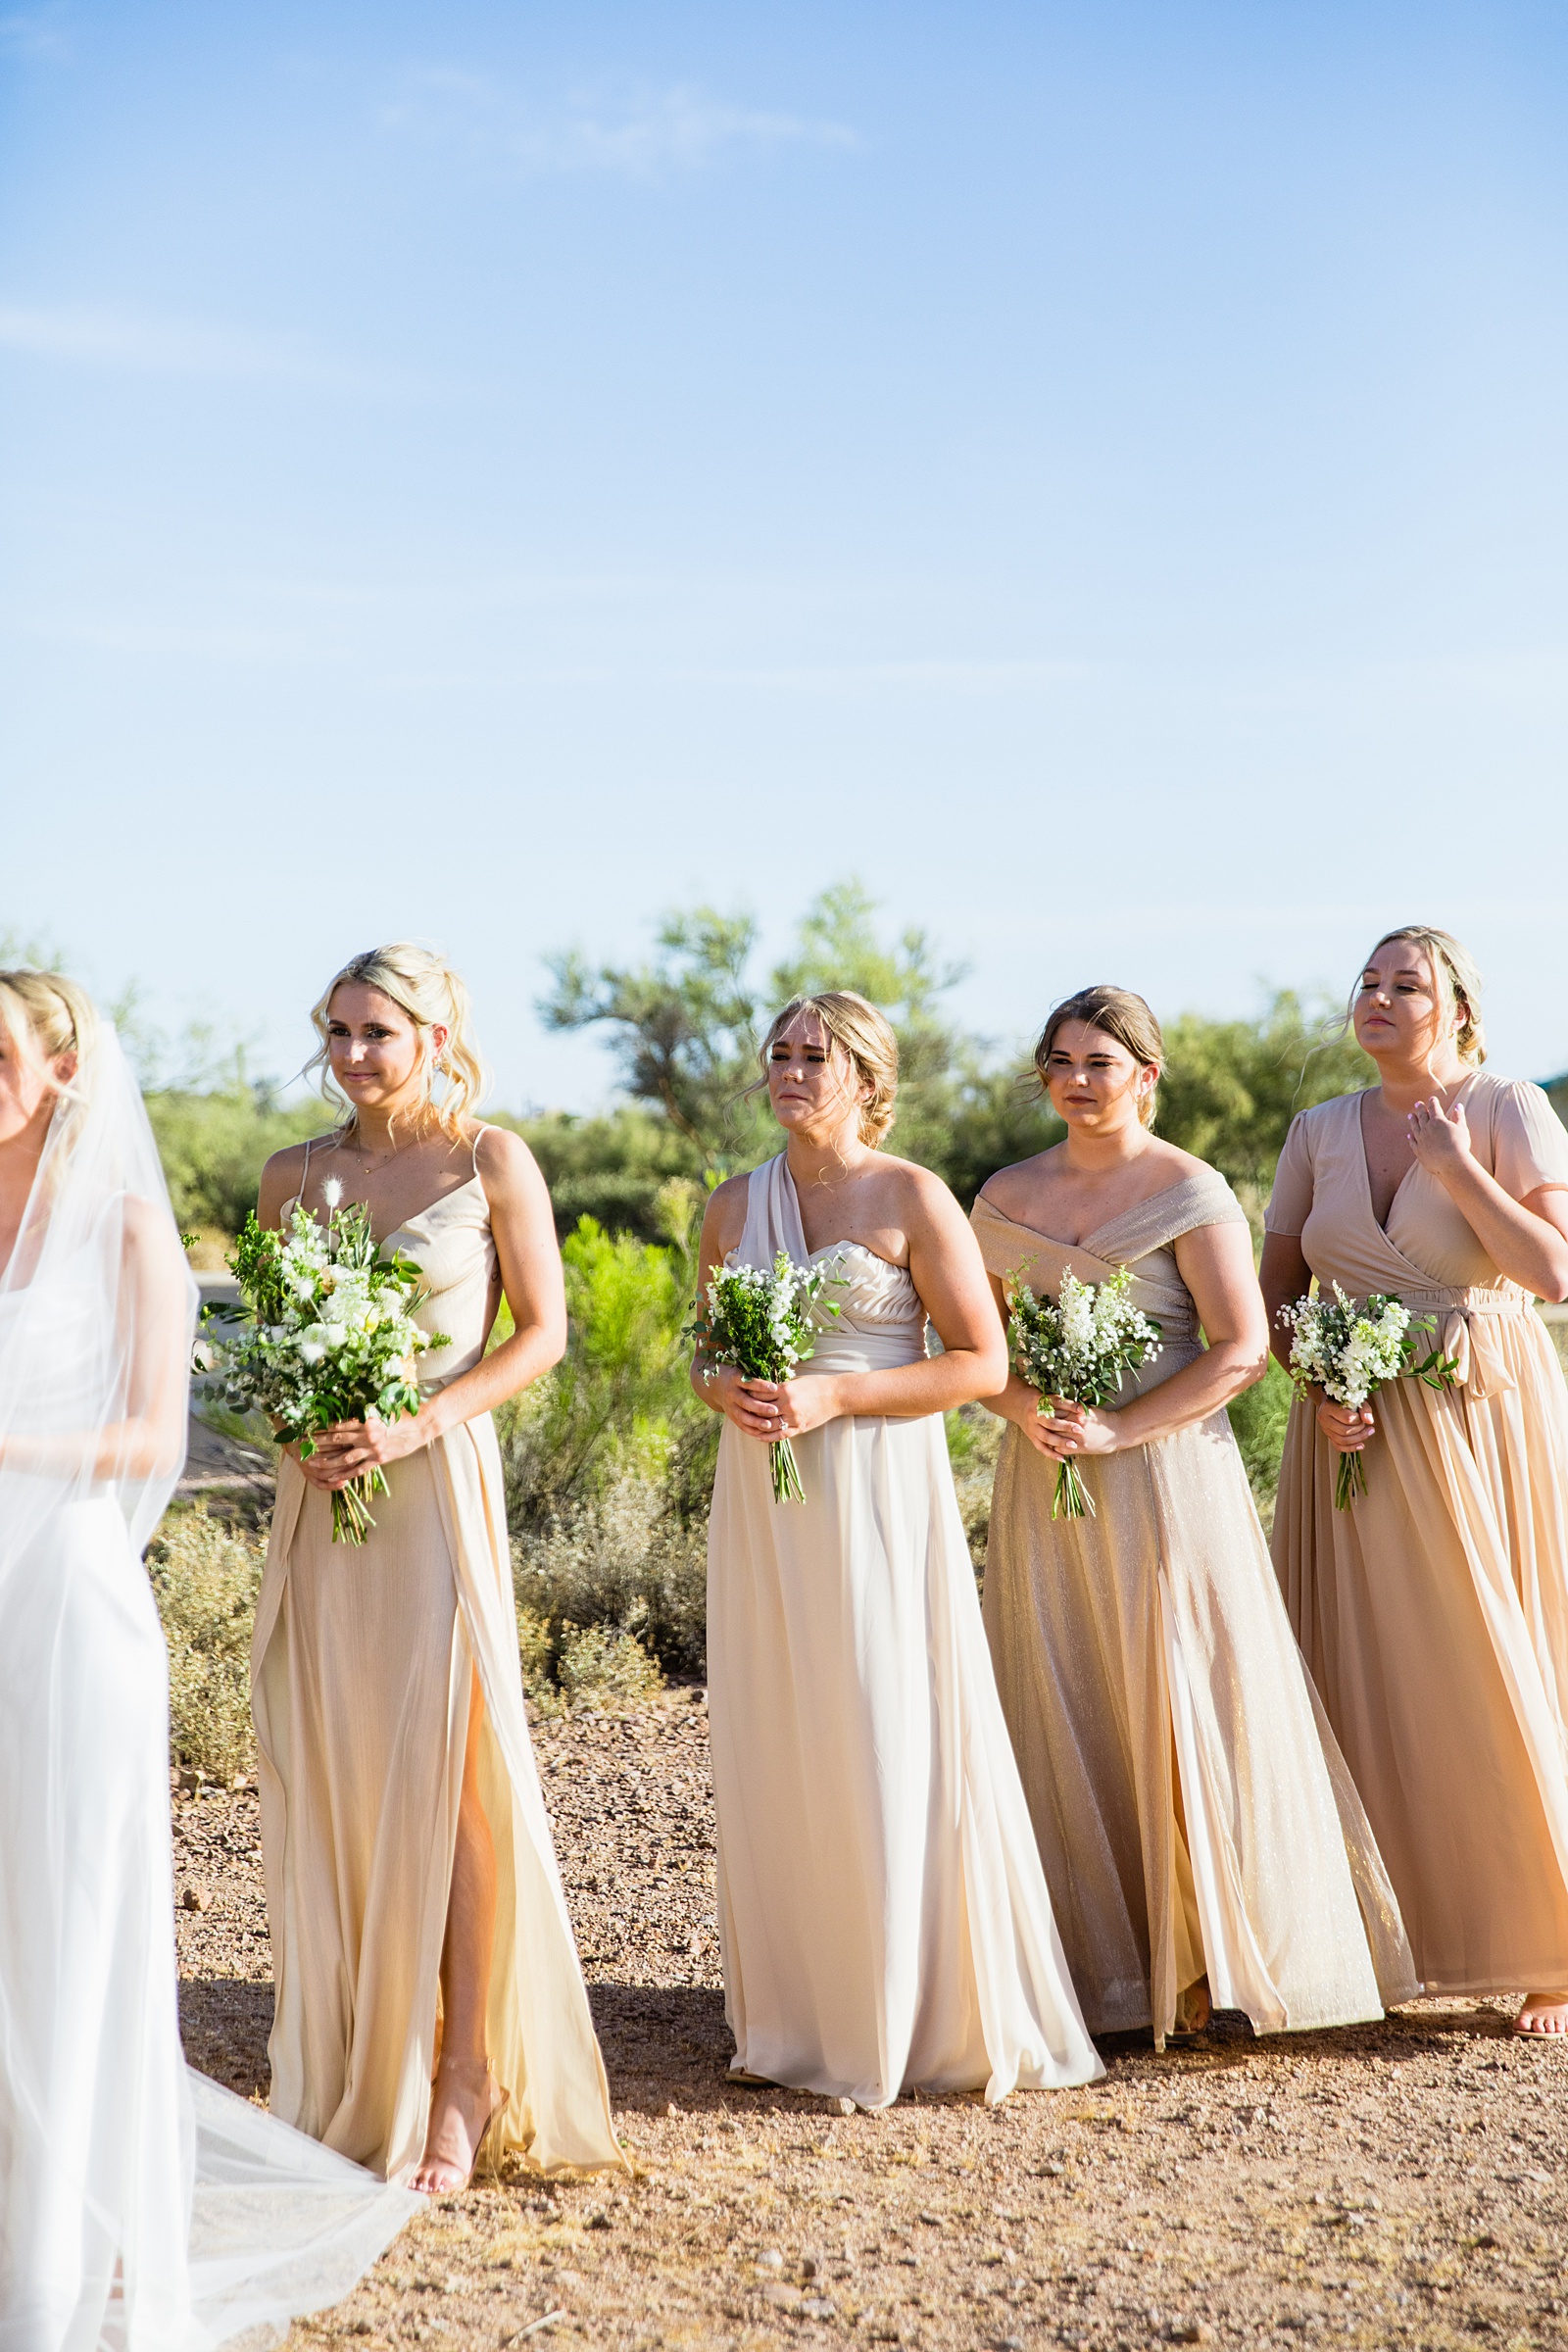 Bridesmaids during Superstition Mountain Micro wedding ceremony by Phoenix wedding photographer PMA Photography.